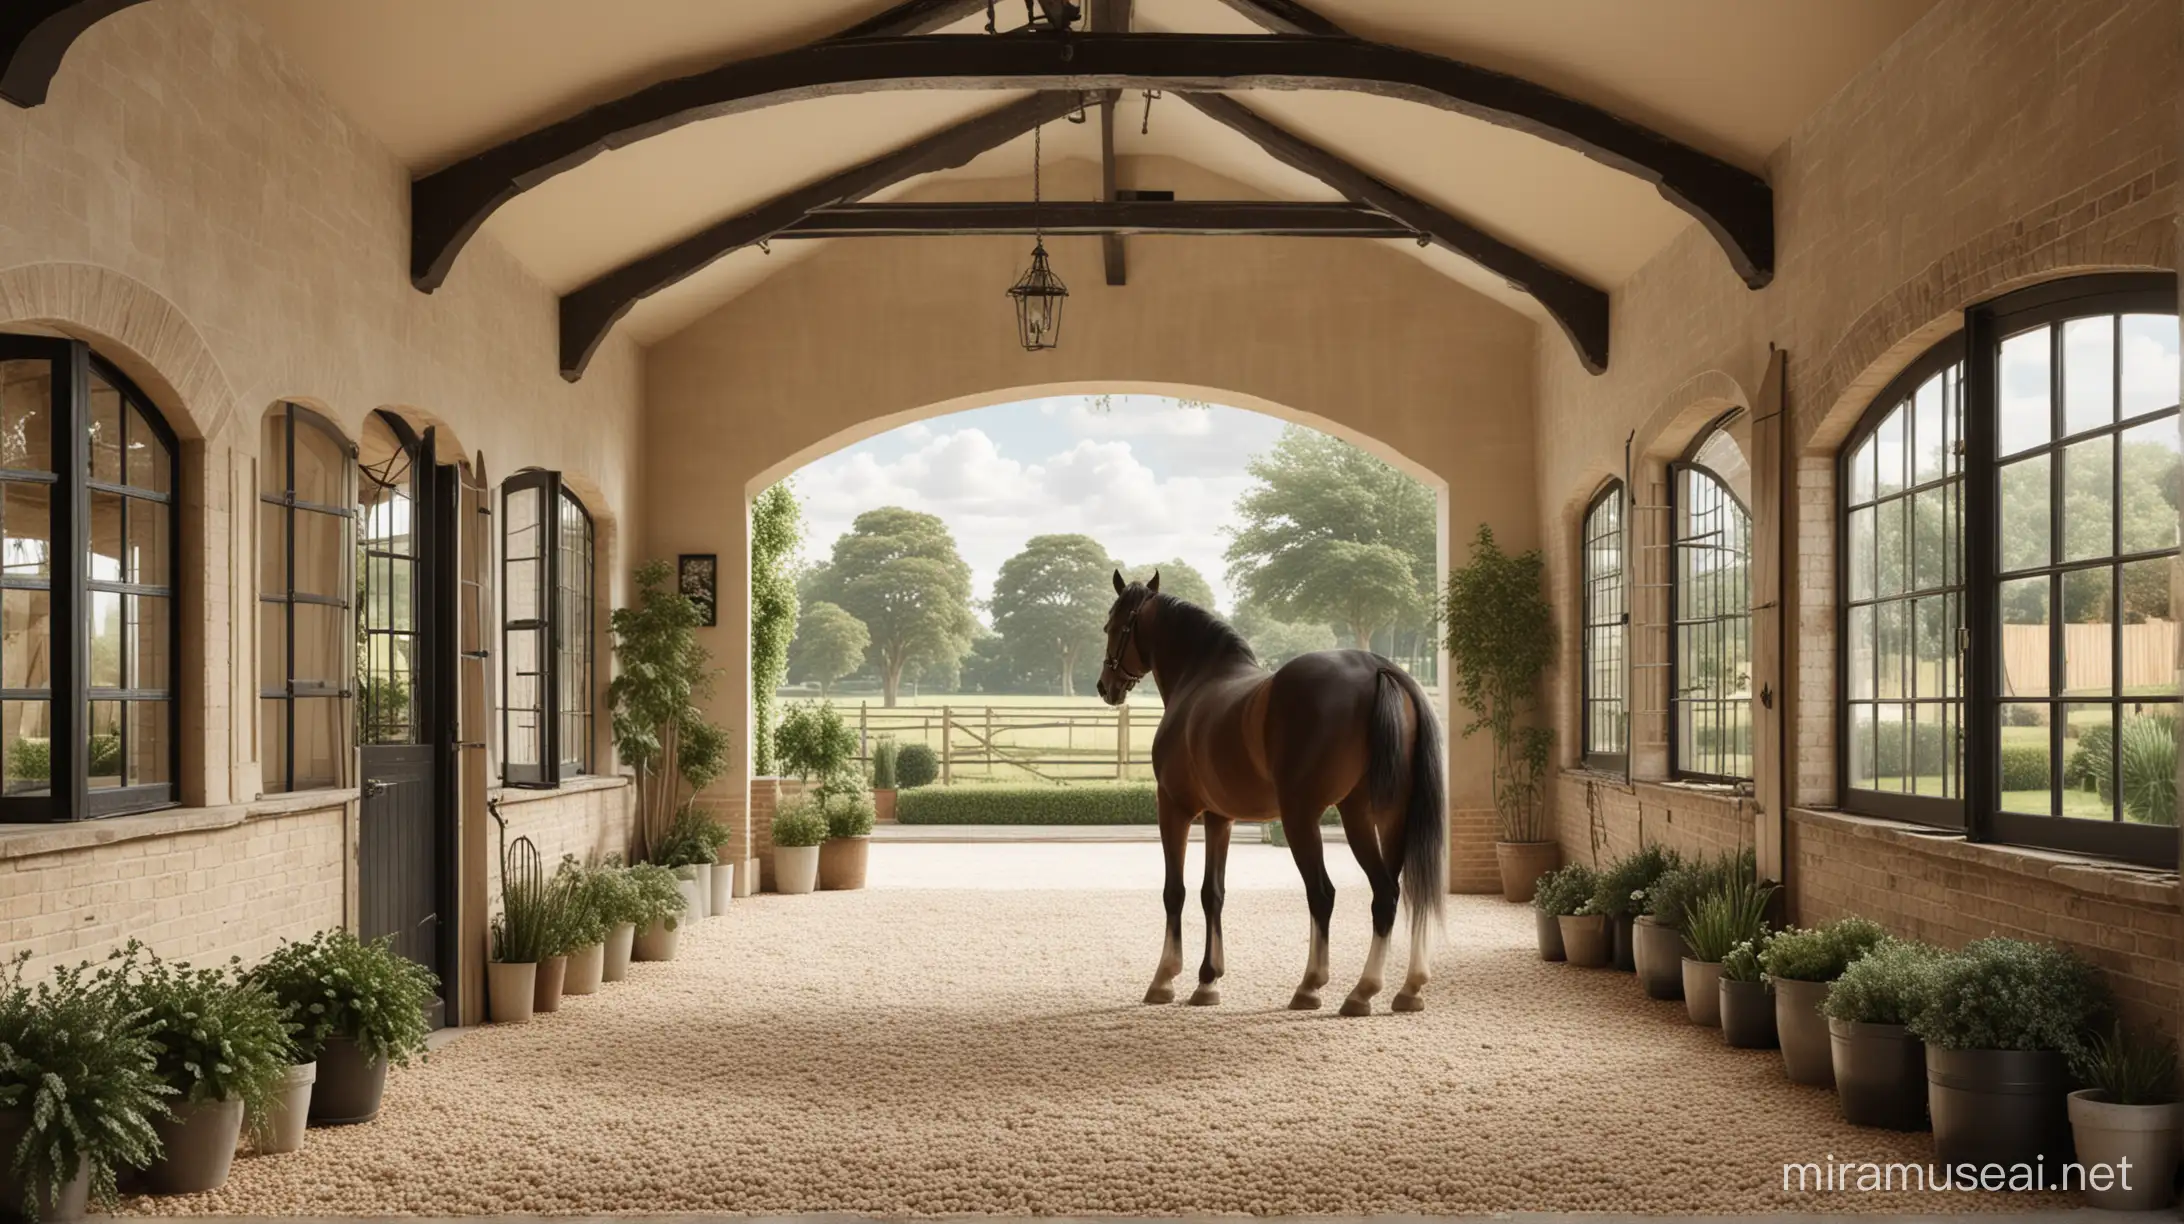 Serene English Country Horse Stable Interior with Natural Light and Symmetrical Layout